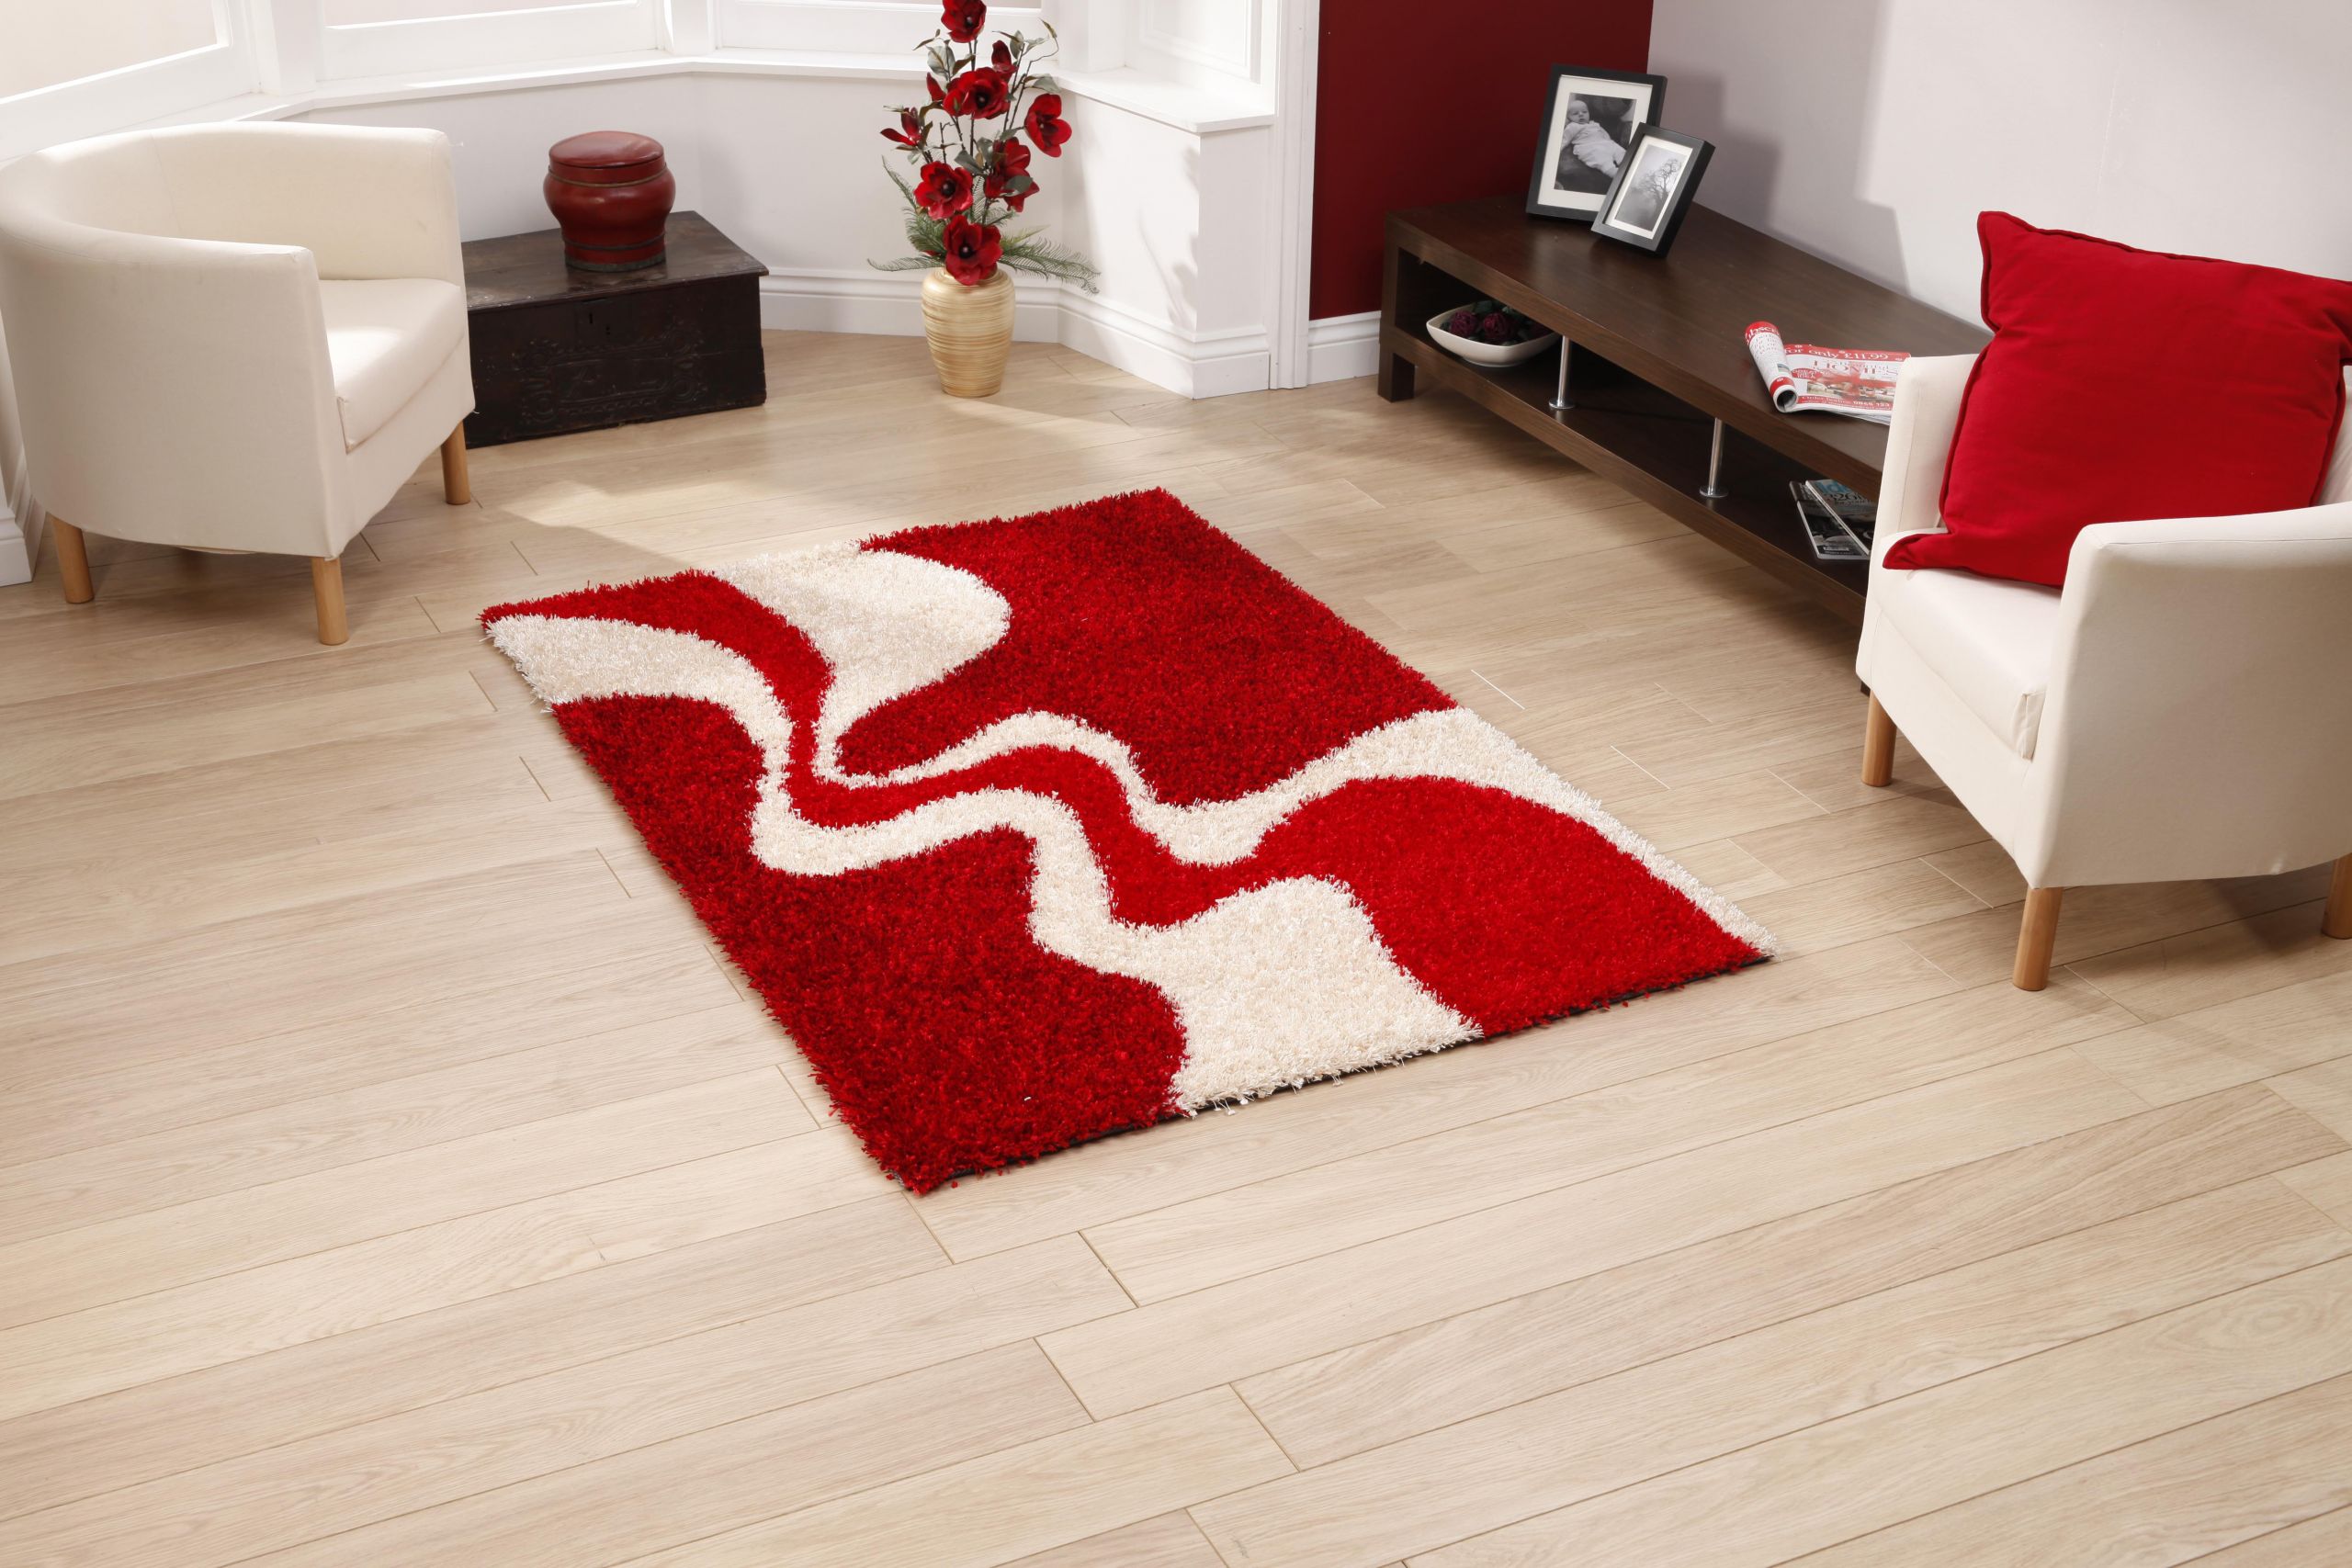 Red Rugs For Living Room
 Tips to Choose Modern Rugs for Living Room